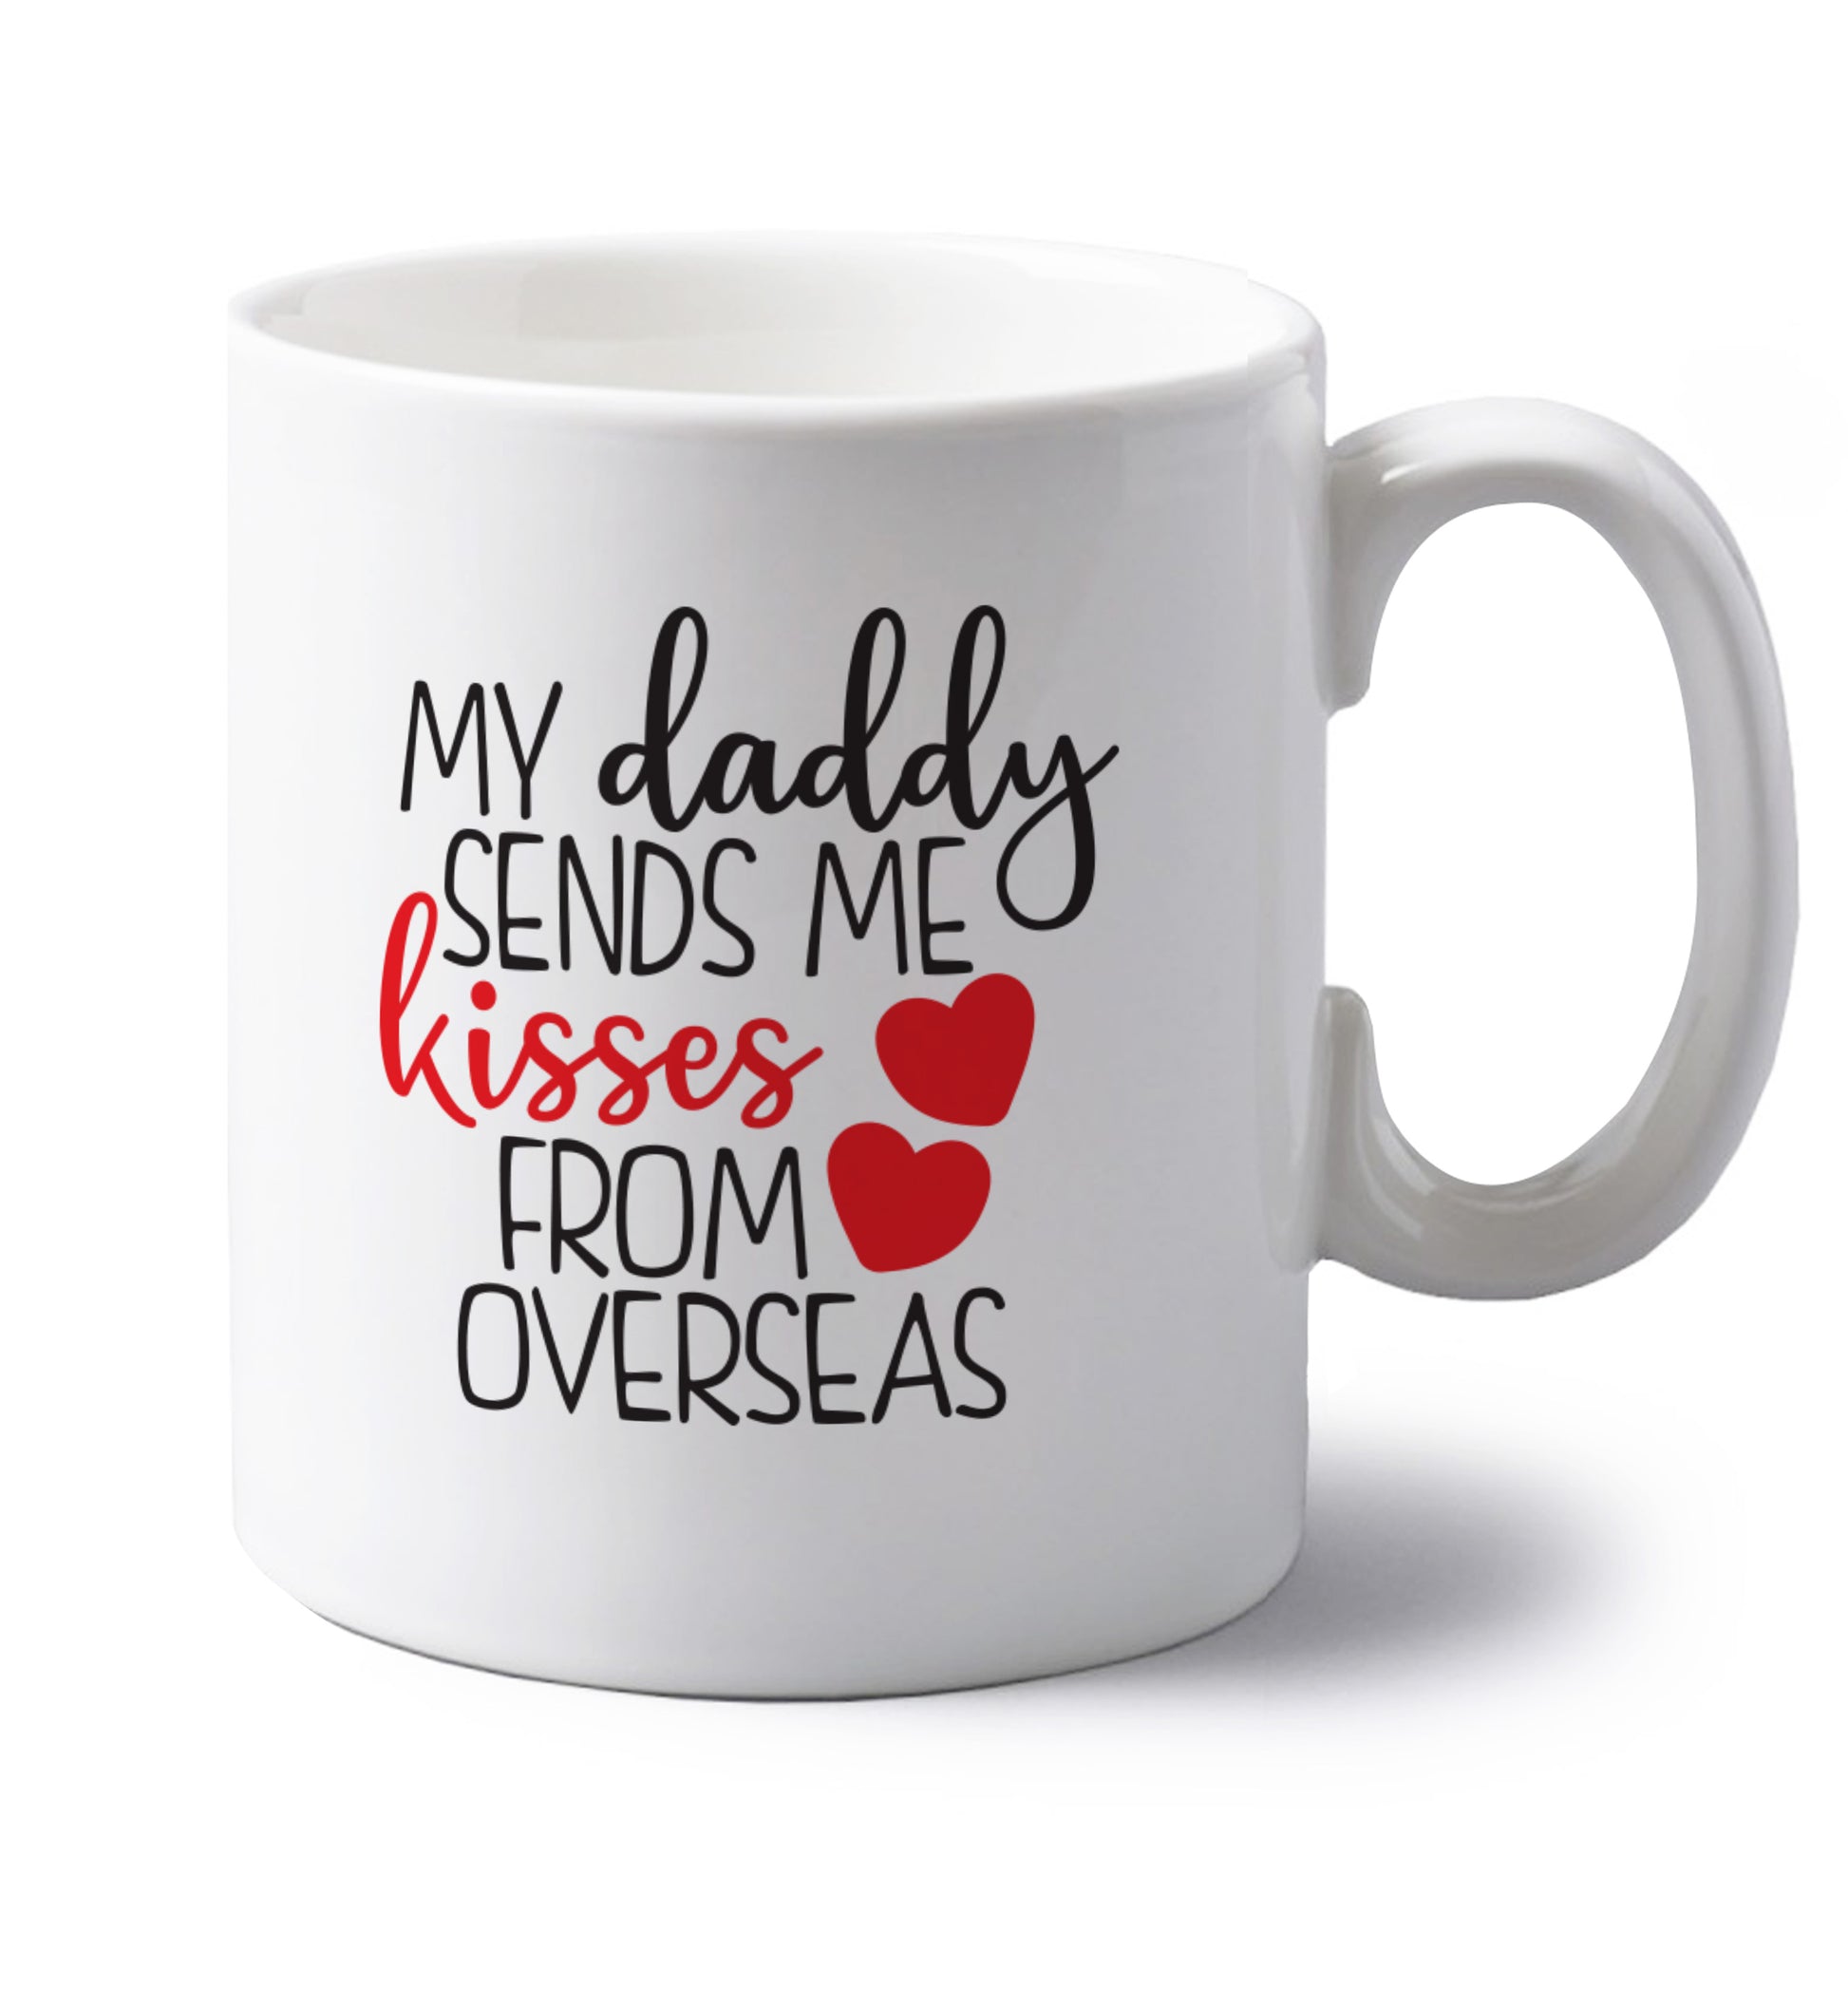 My daddy sends me kisses from overseas left handed white ceramic mug 